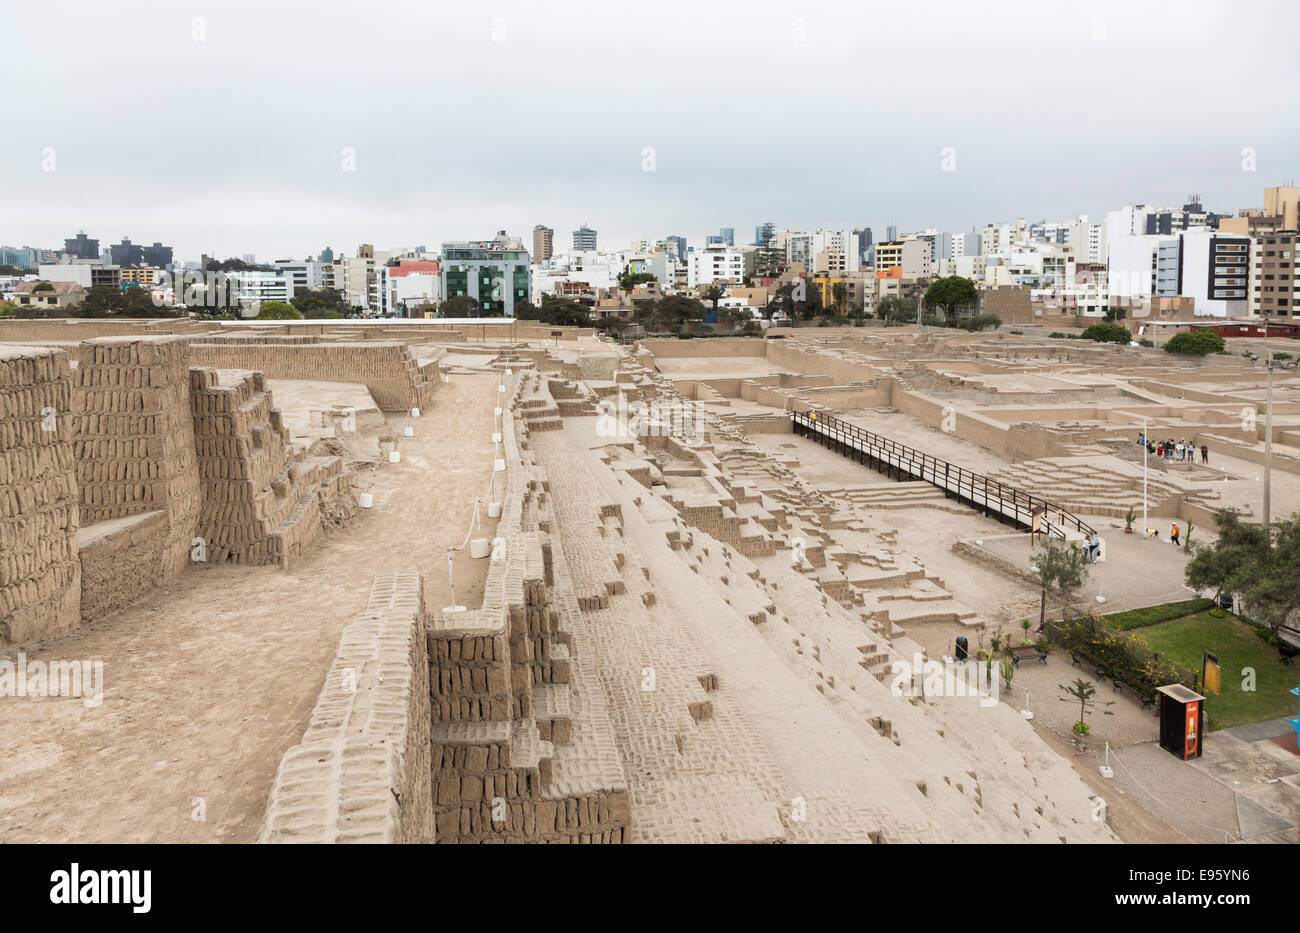 Sightseeing ancient Peruvian culture / heritage: view of Huaca Pucllana or Huaca Juliana pyramid, with modern Miraflores, Lima, Peru in the background Stock Photo